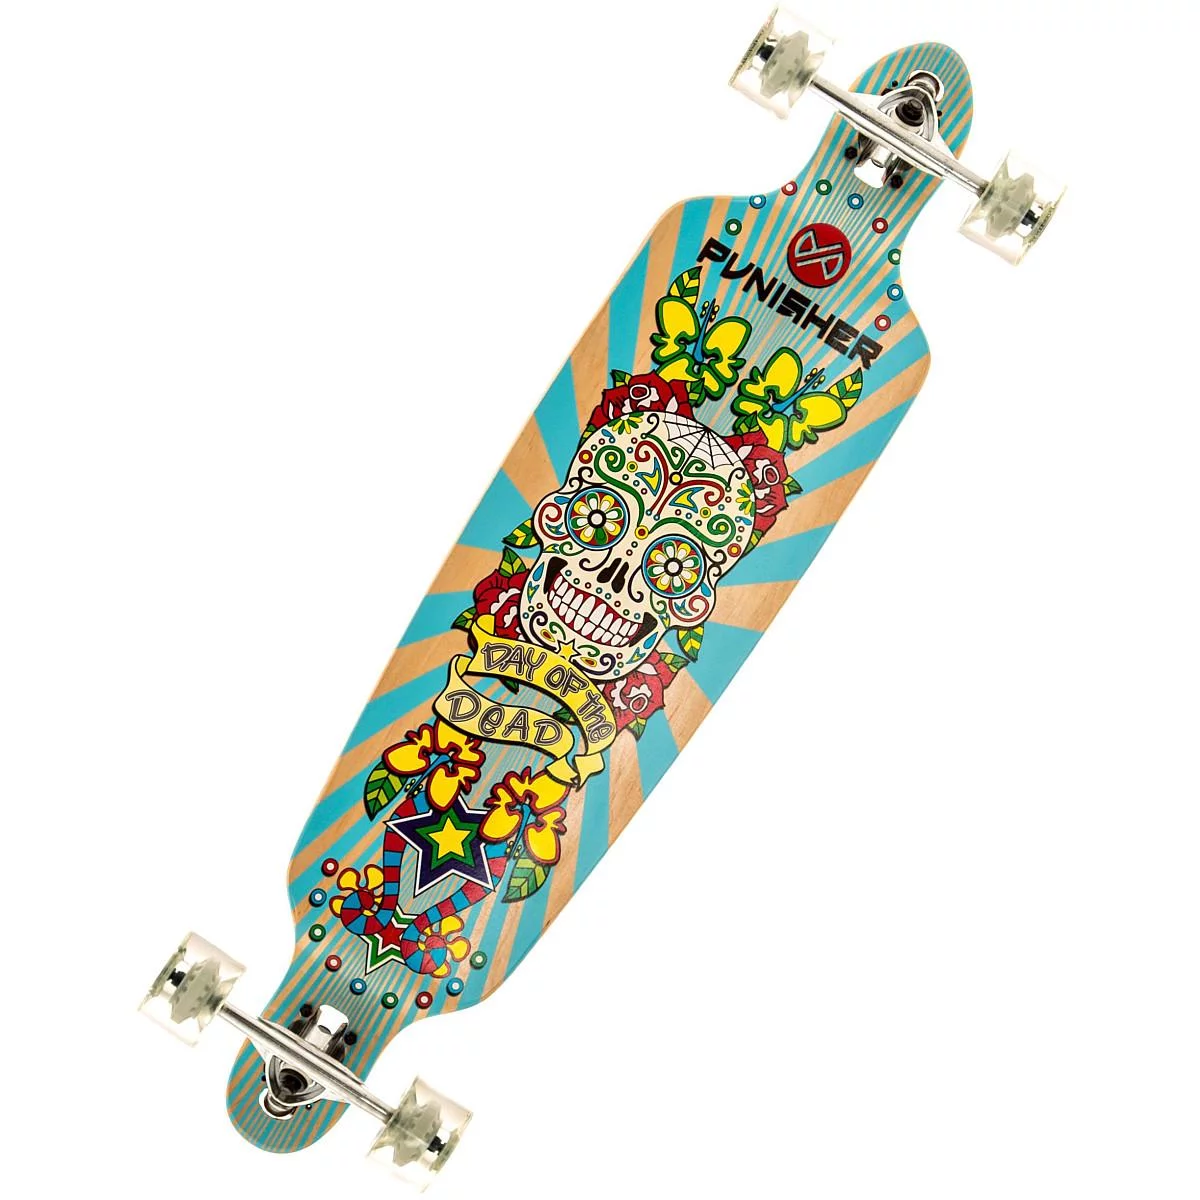 Punisher Skateboards Day of the Dead 40" Longboard, Double Kick with Drop Down Deck and ABEC-9 Bearings